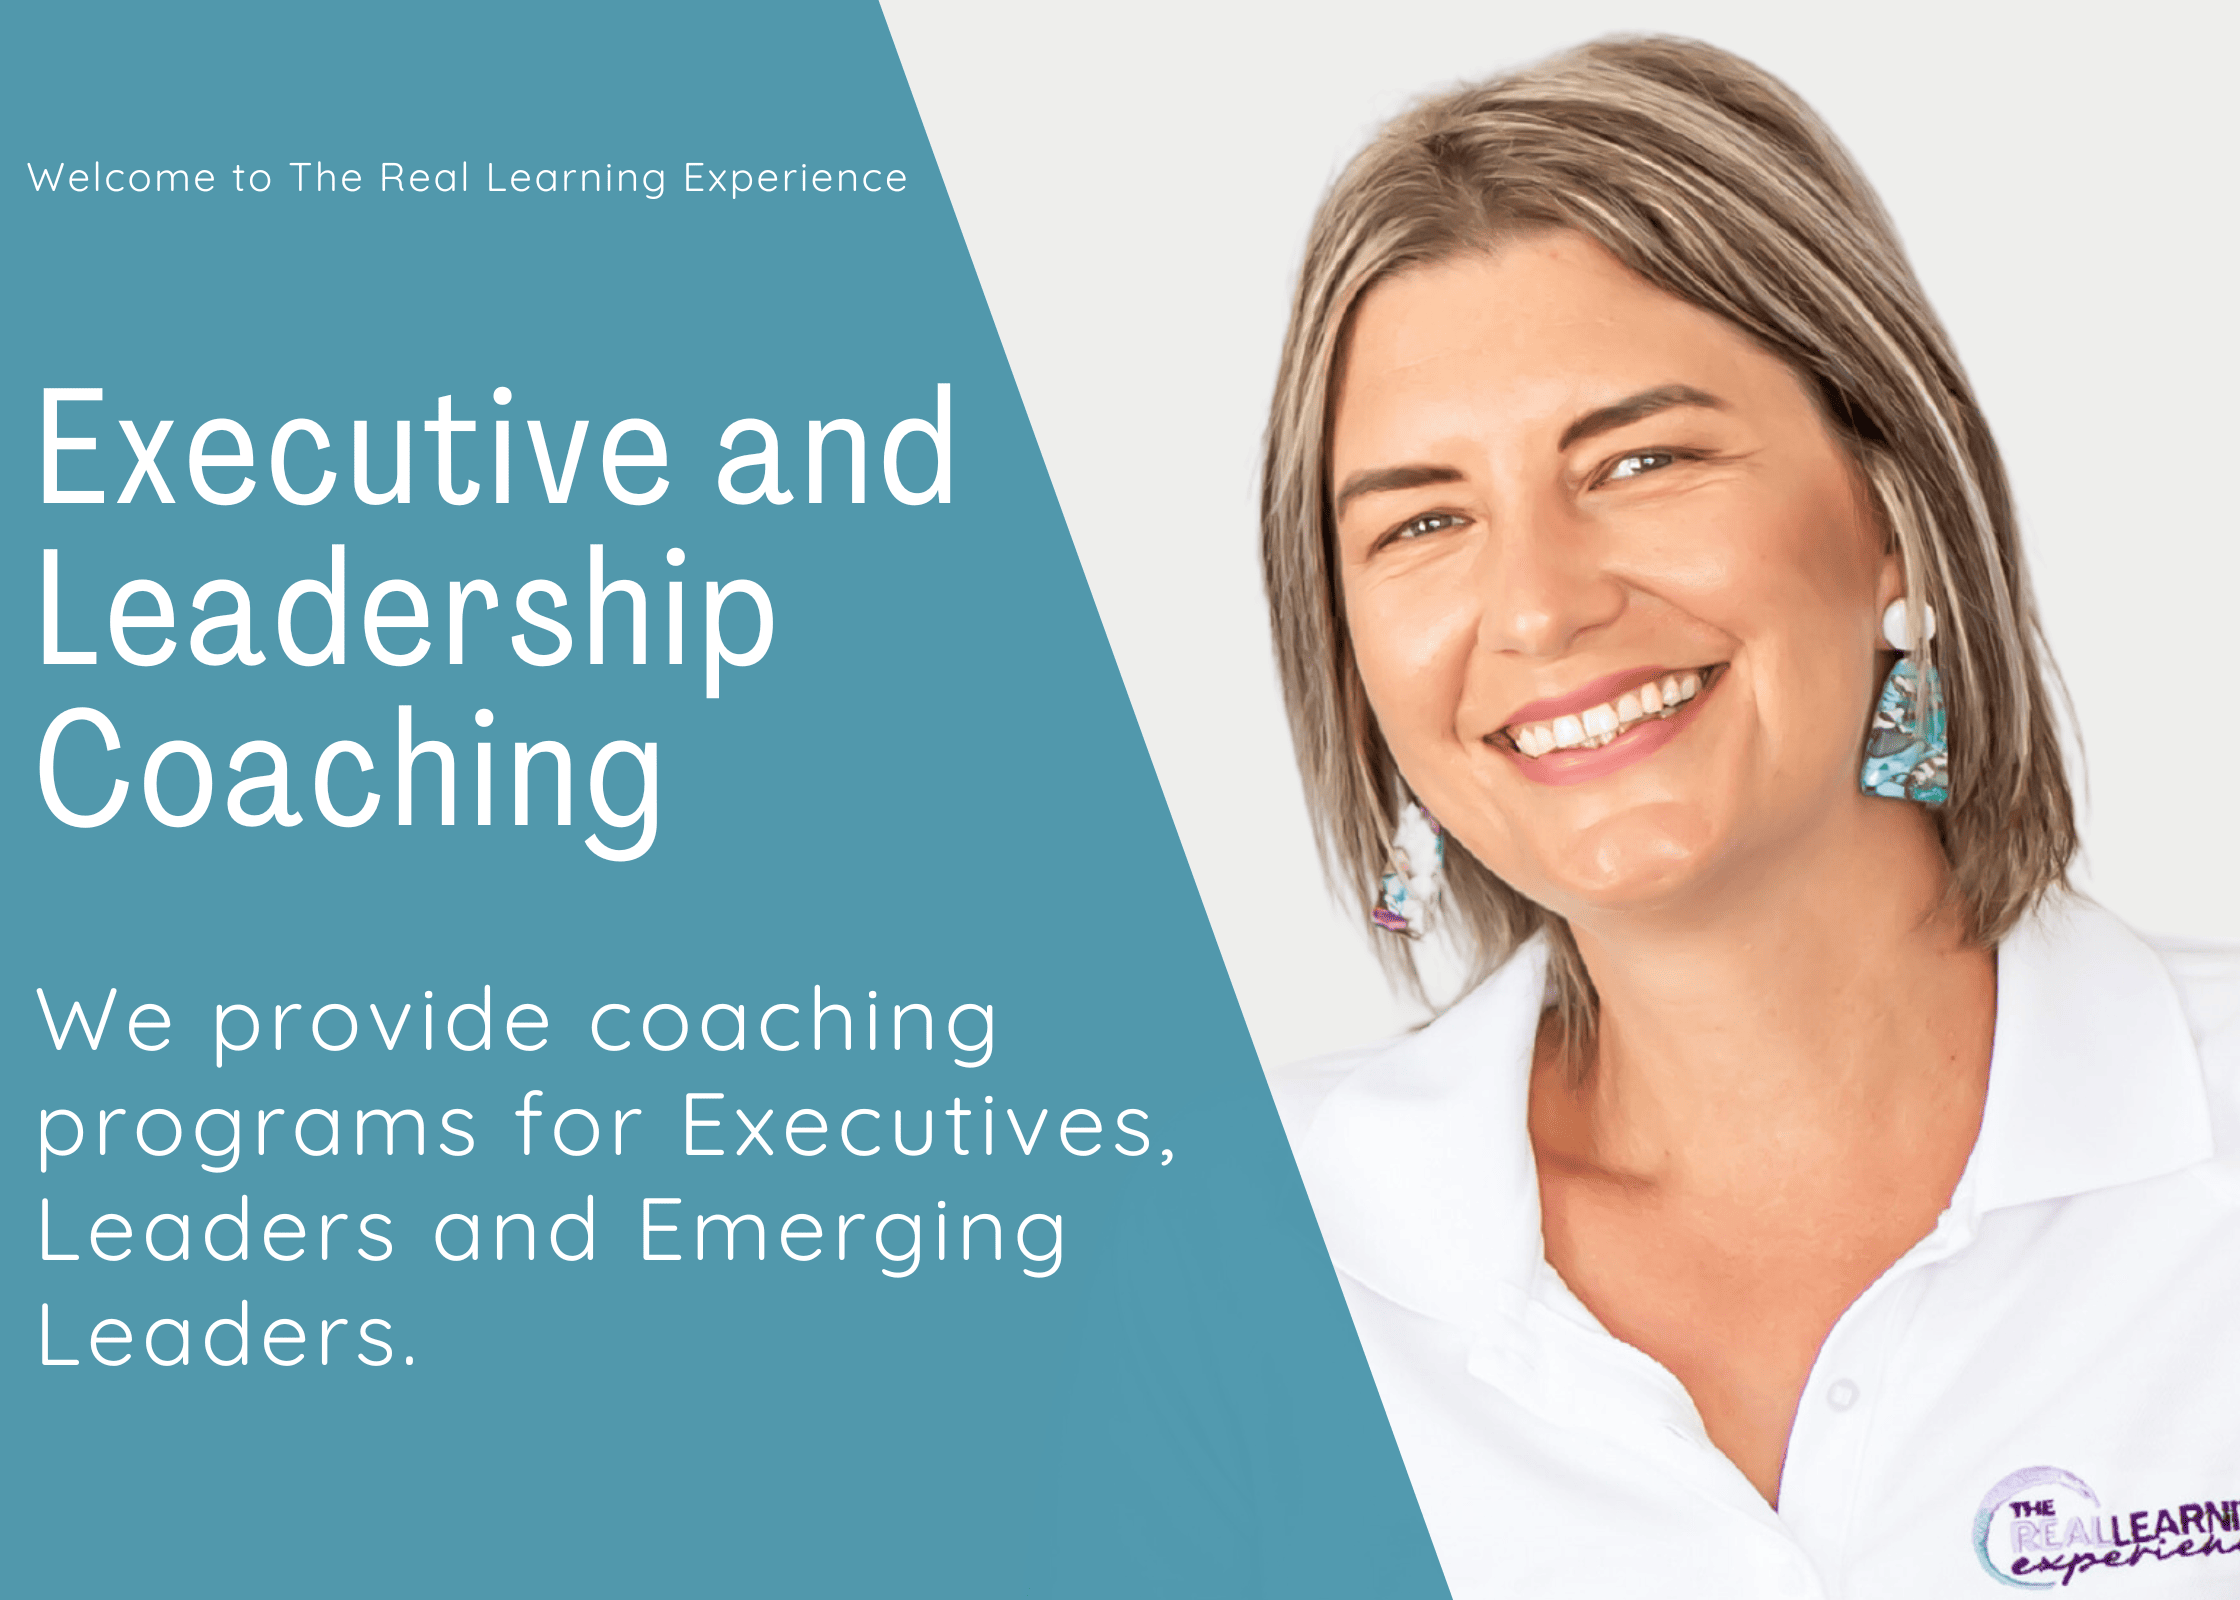 We provide coaching packages for Executives, Leaders and Emerging Leaders